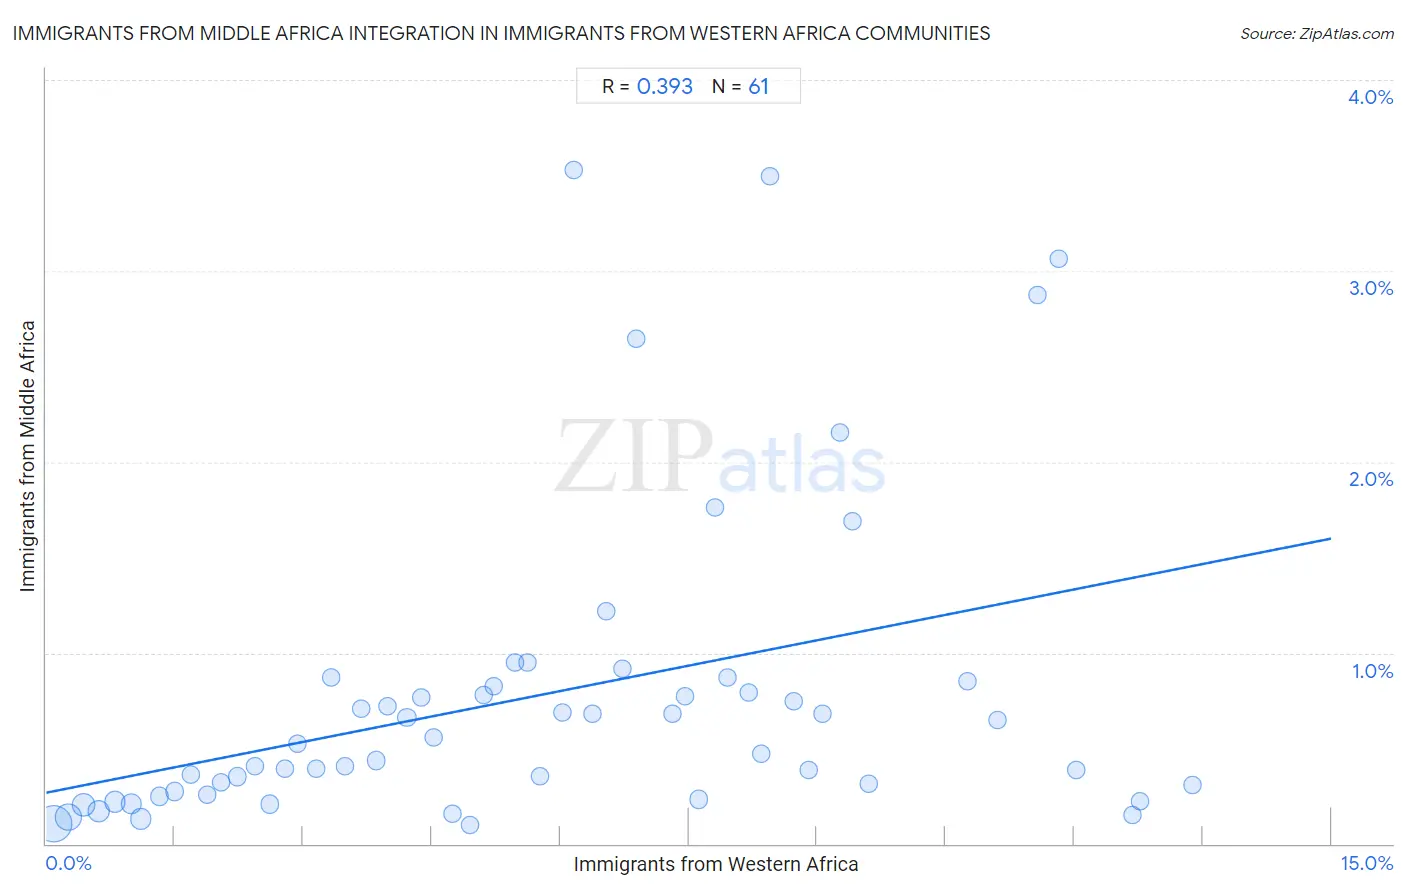 Immigrants from Western Africa Integration in Immigrants from Middle Africa Communities